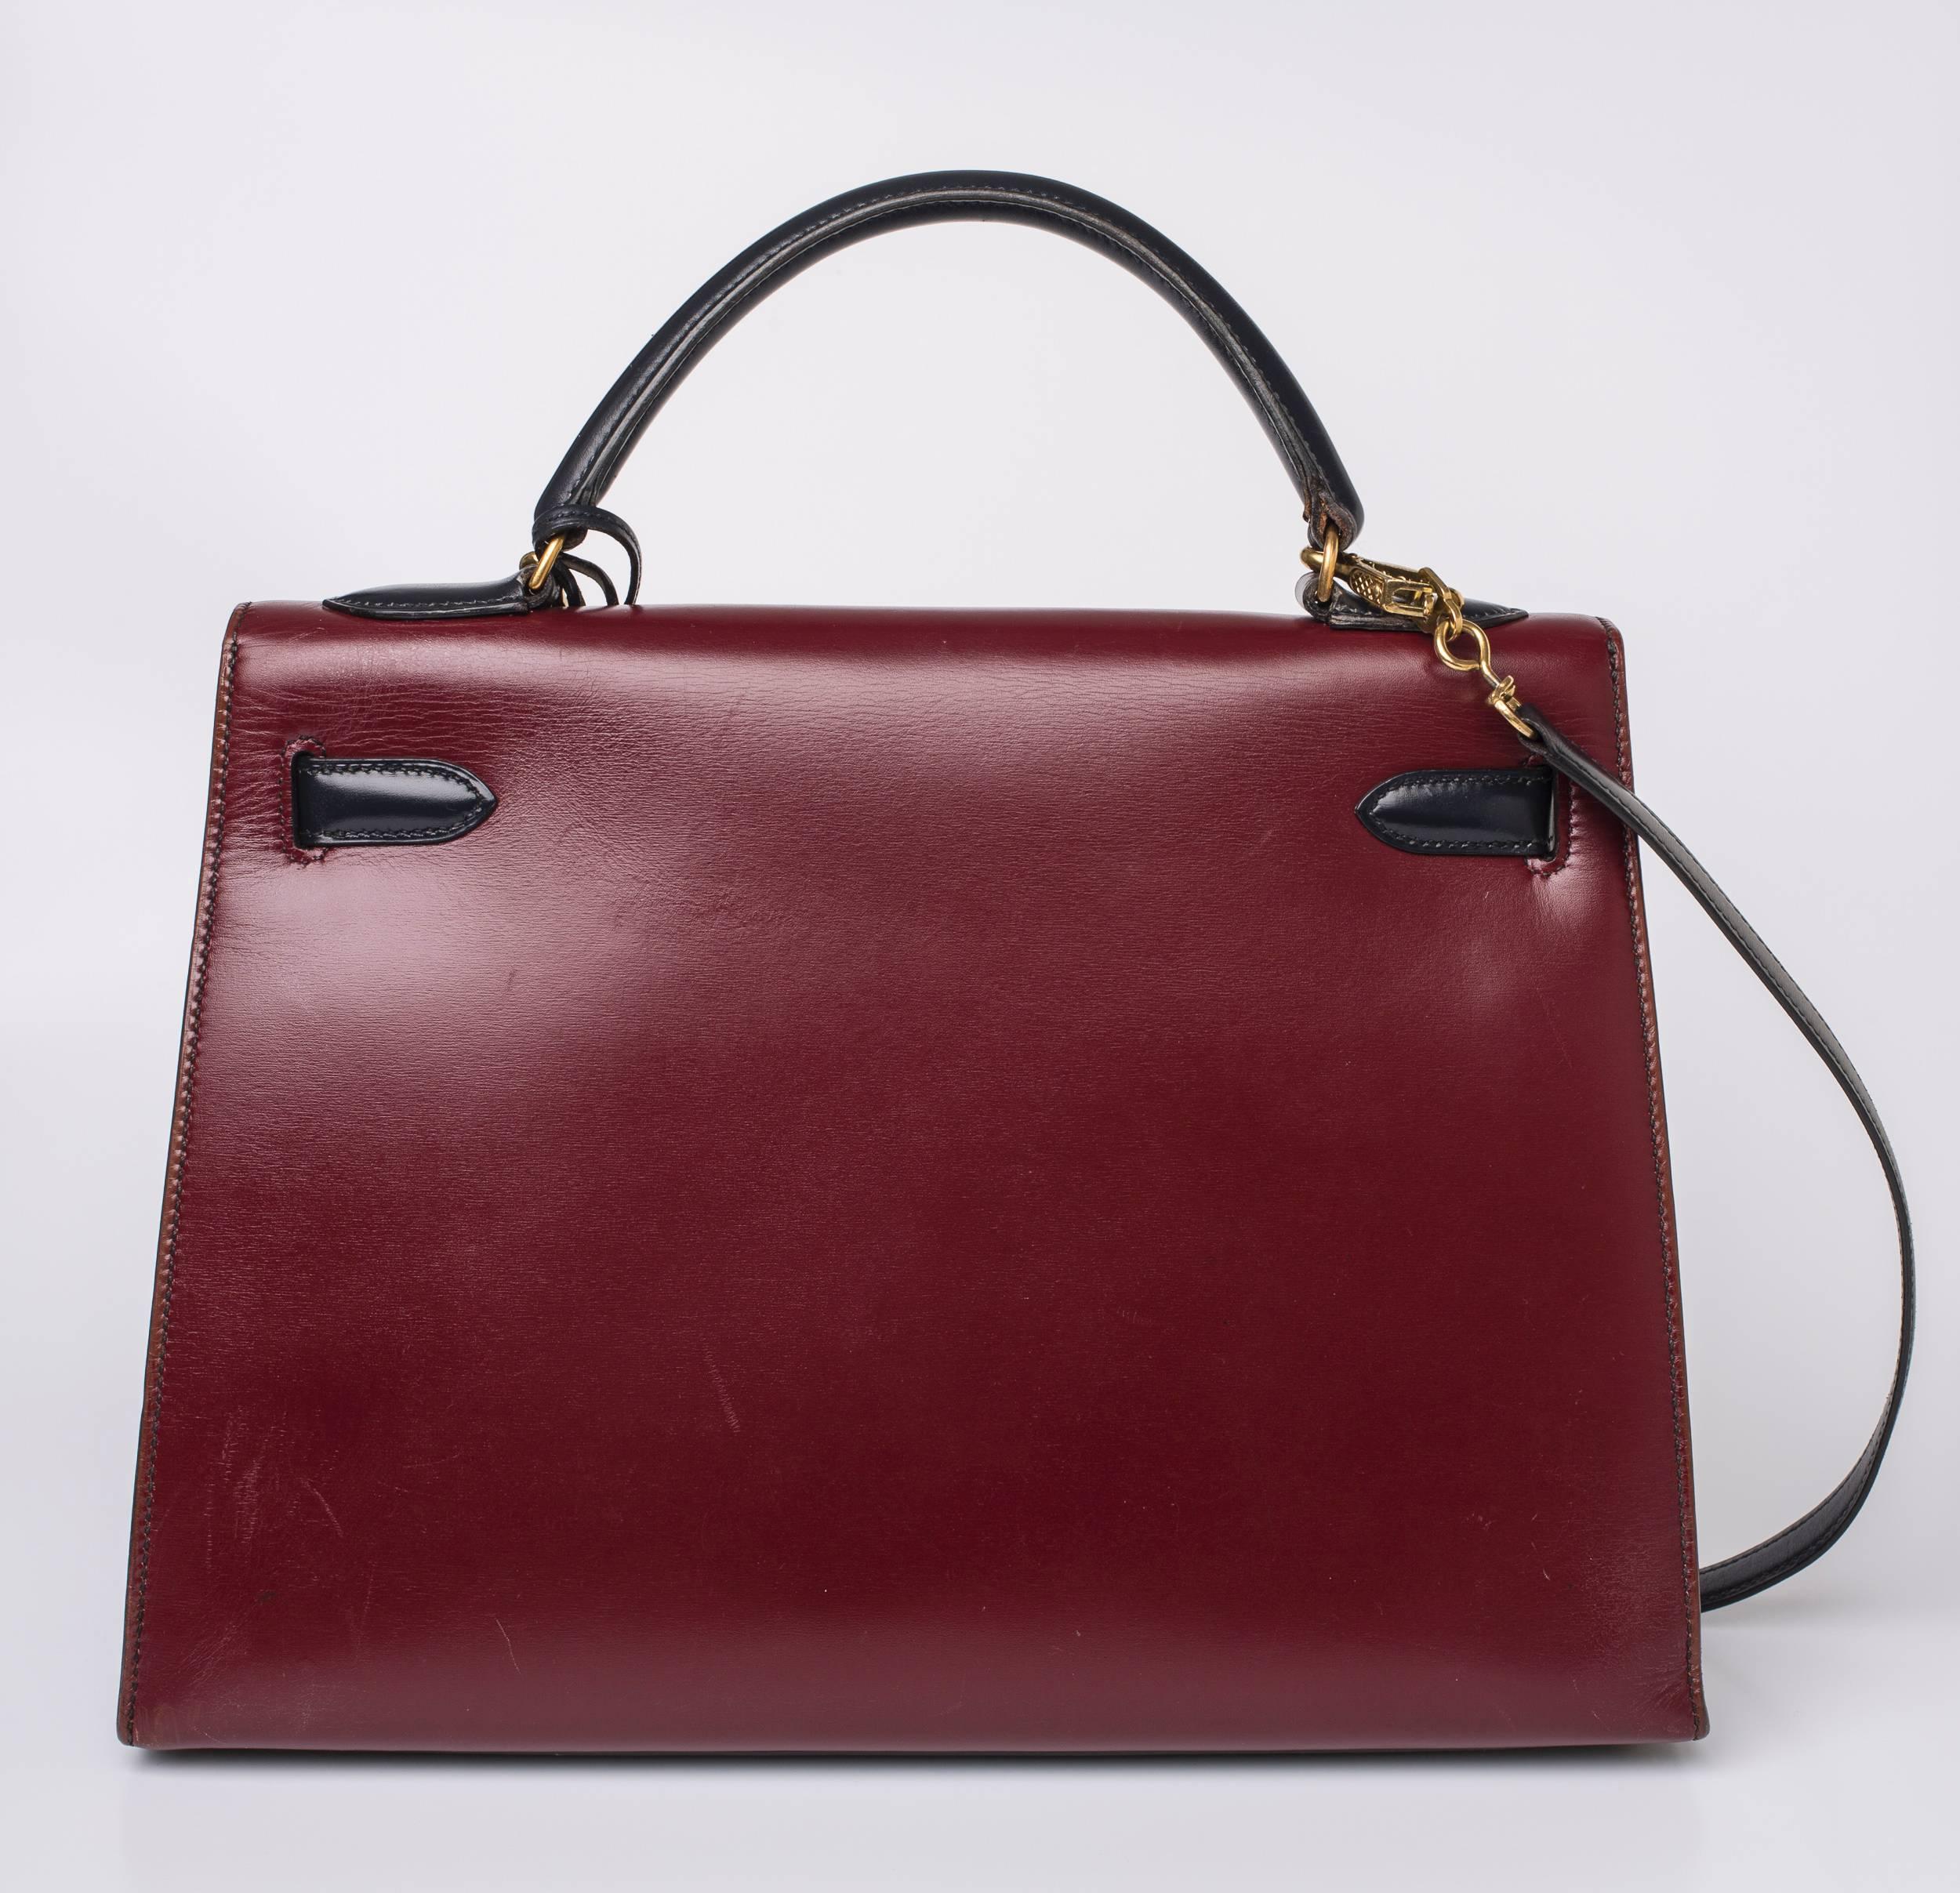 Hermès Paris green and wine-colored color-block Kelly bag in calf skin. Date stamped circle 